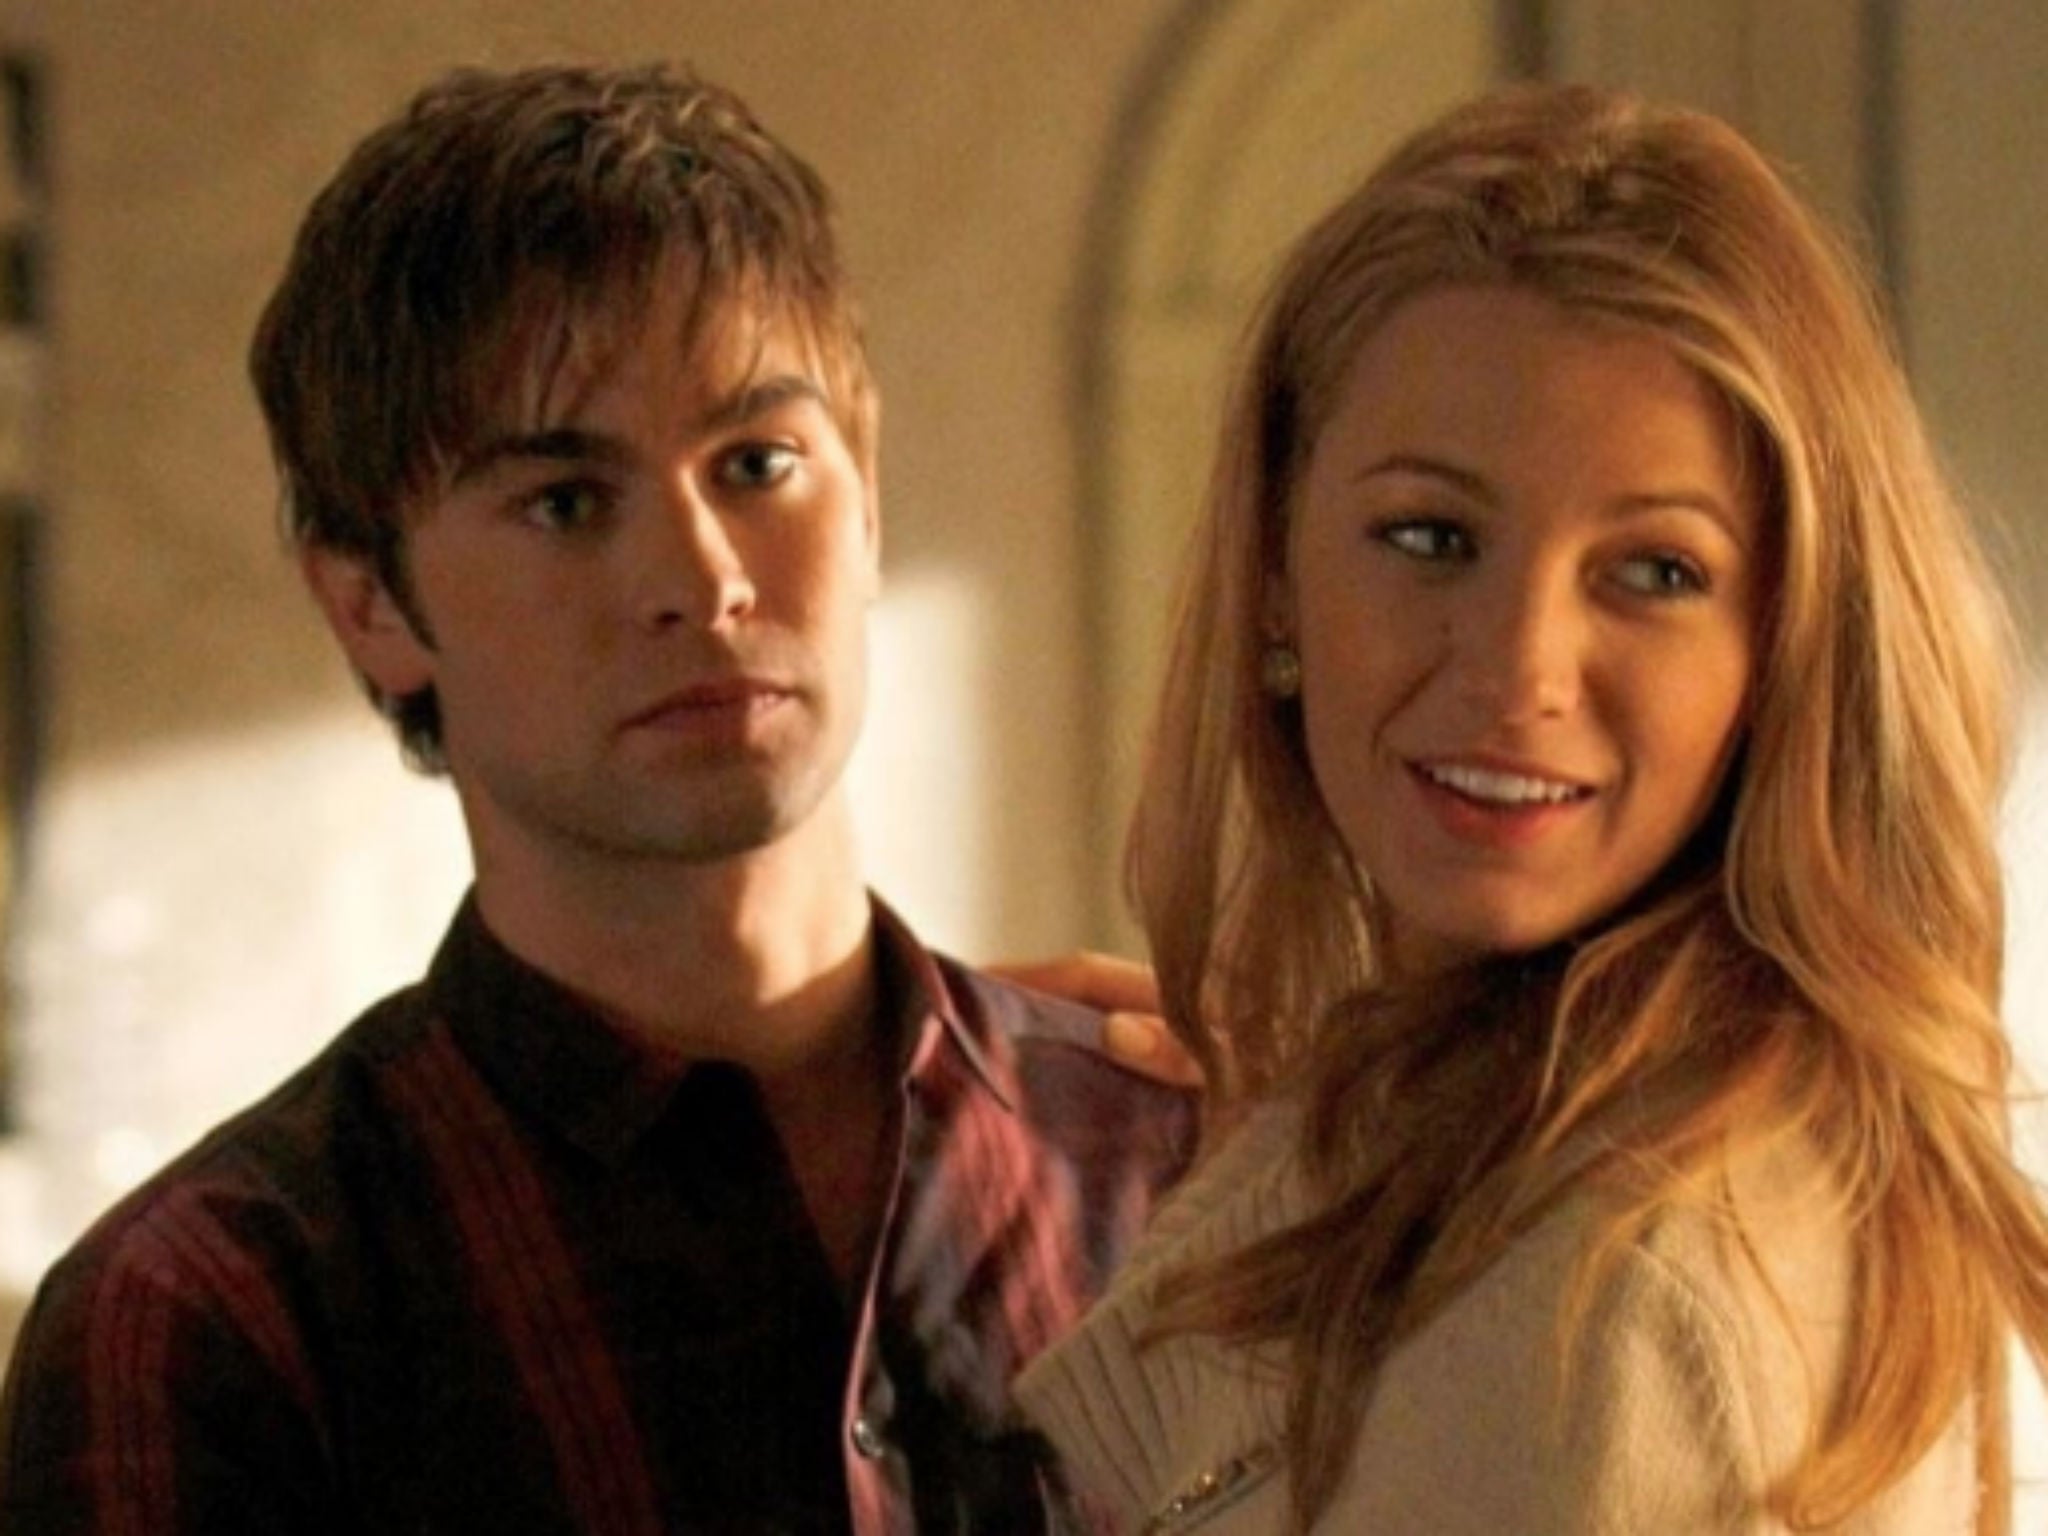 Chace Crawford with Blake Lively in hit CW series ‘Gossip Girl’